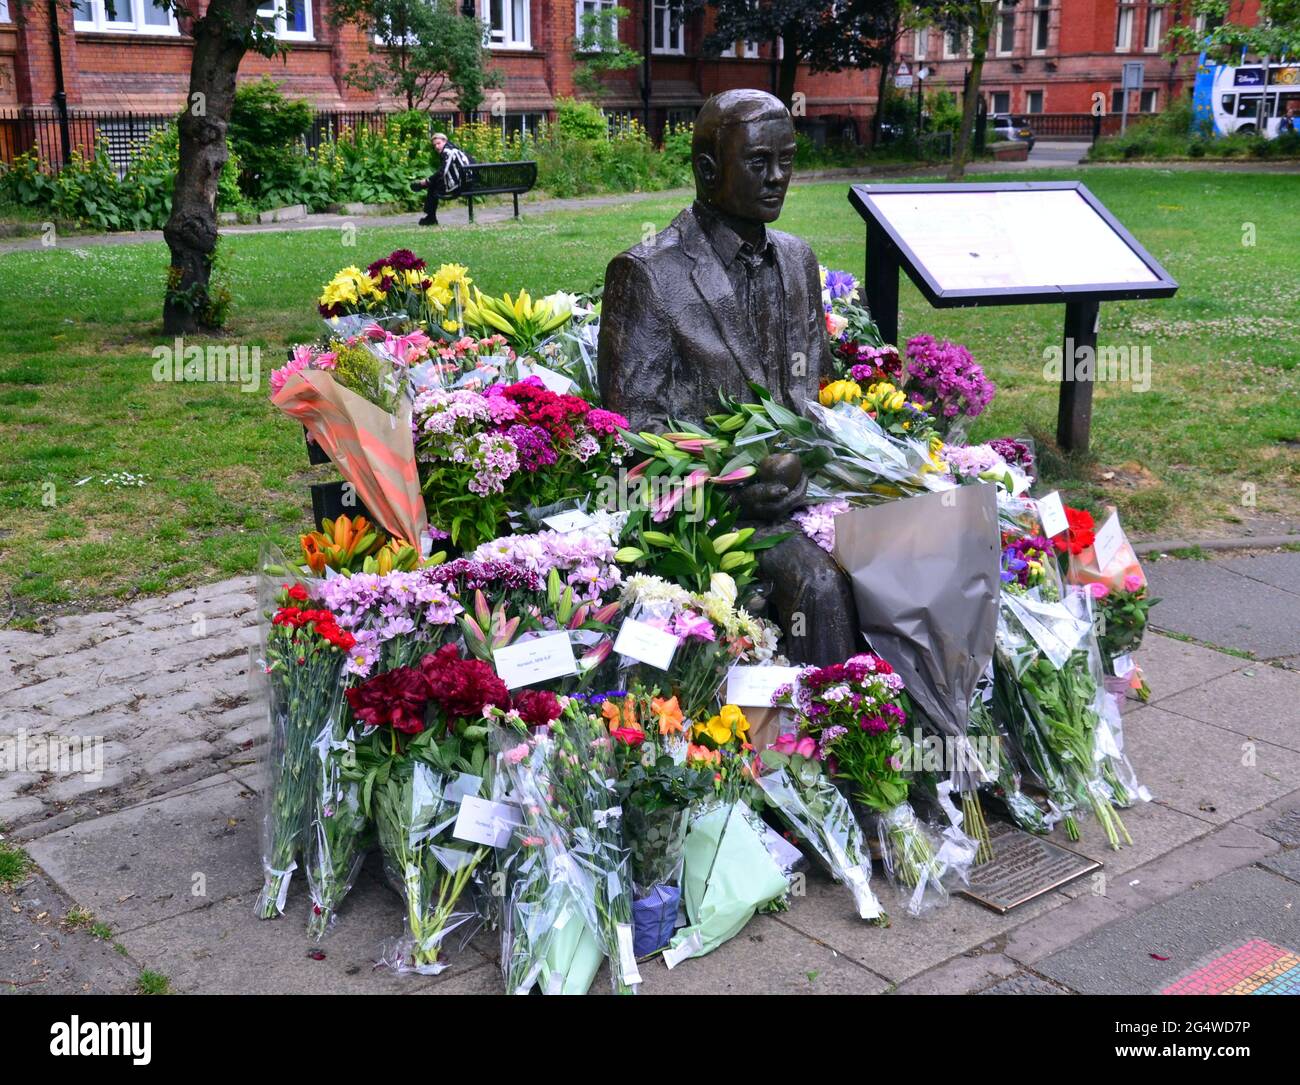 Flowers surround the Alan Turing statue and memorial, Sackville Gardens, Manchester, England, Britain, United Kingdom, on 23rd June, 2021, the anniversary of Turing's birthday. Alan Mathison Turing OBE was an English mathematician, computer scientist, logician, and cryptanalyst. In WW2 he led a team that was responsible for breaking German ciphers of the Enigma machine. Turing was then influential in developing computer science at the University of Manchester. Stock Photo